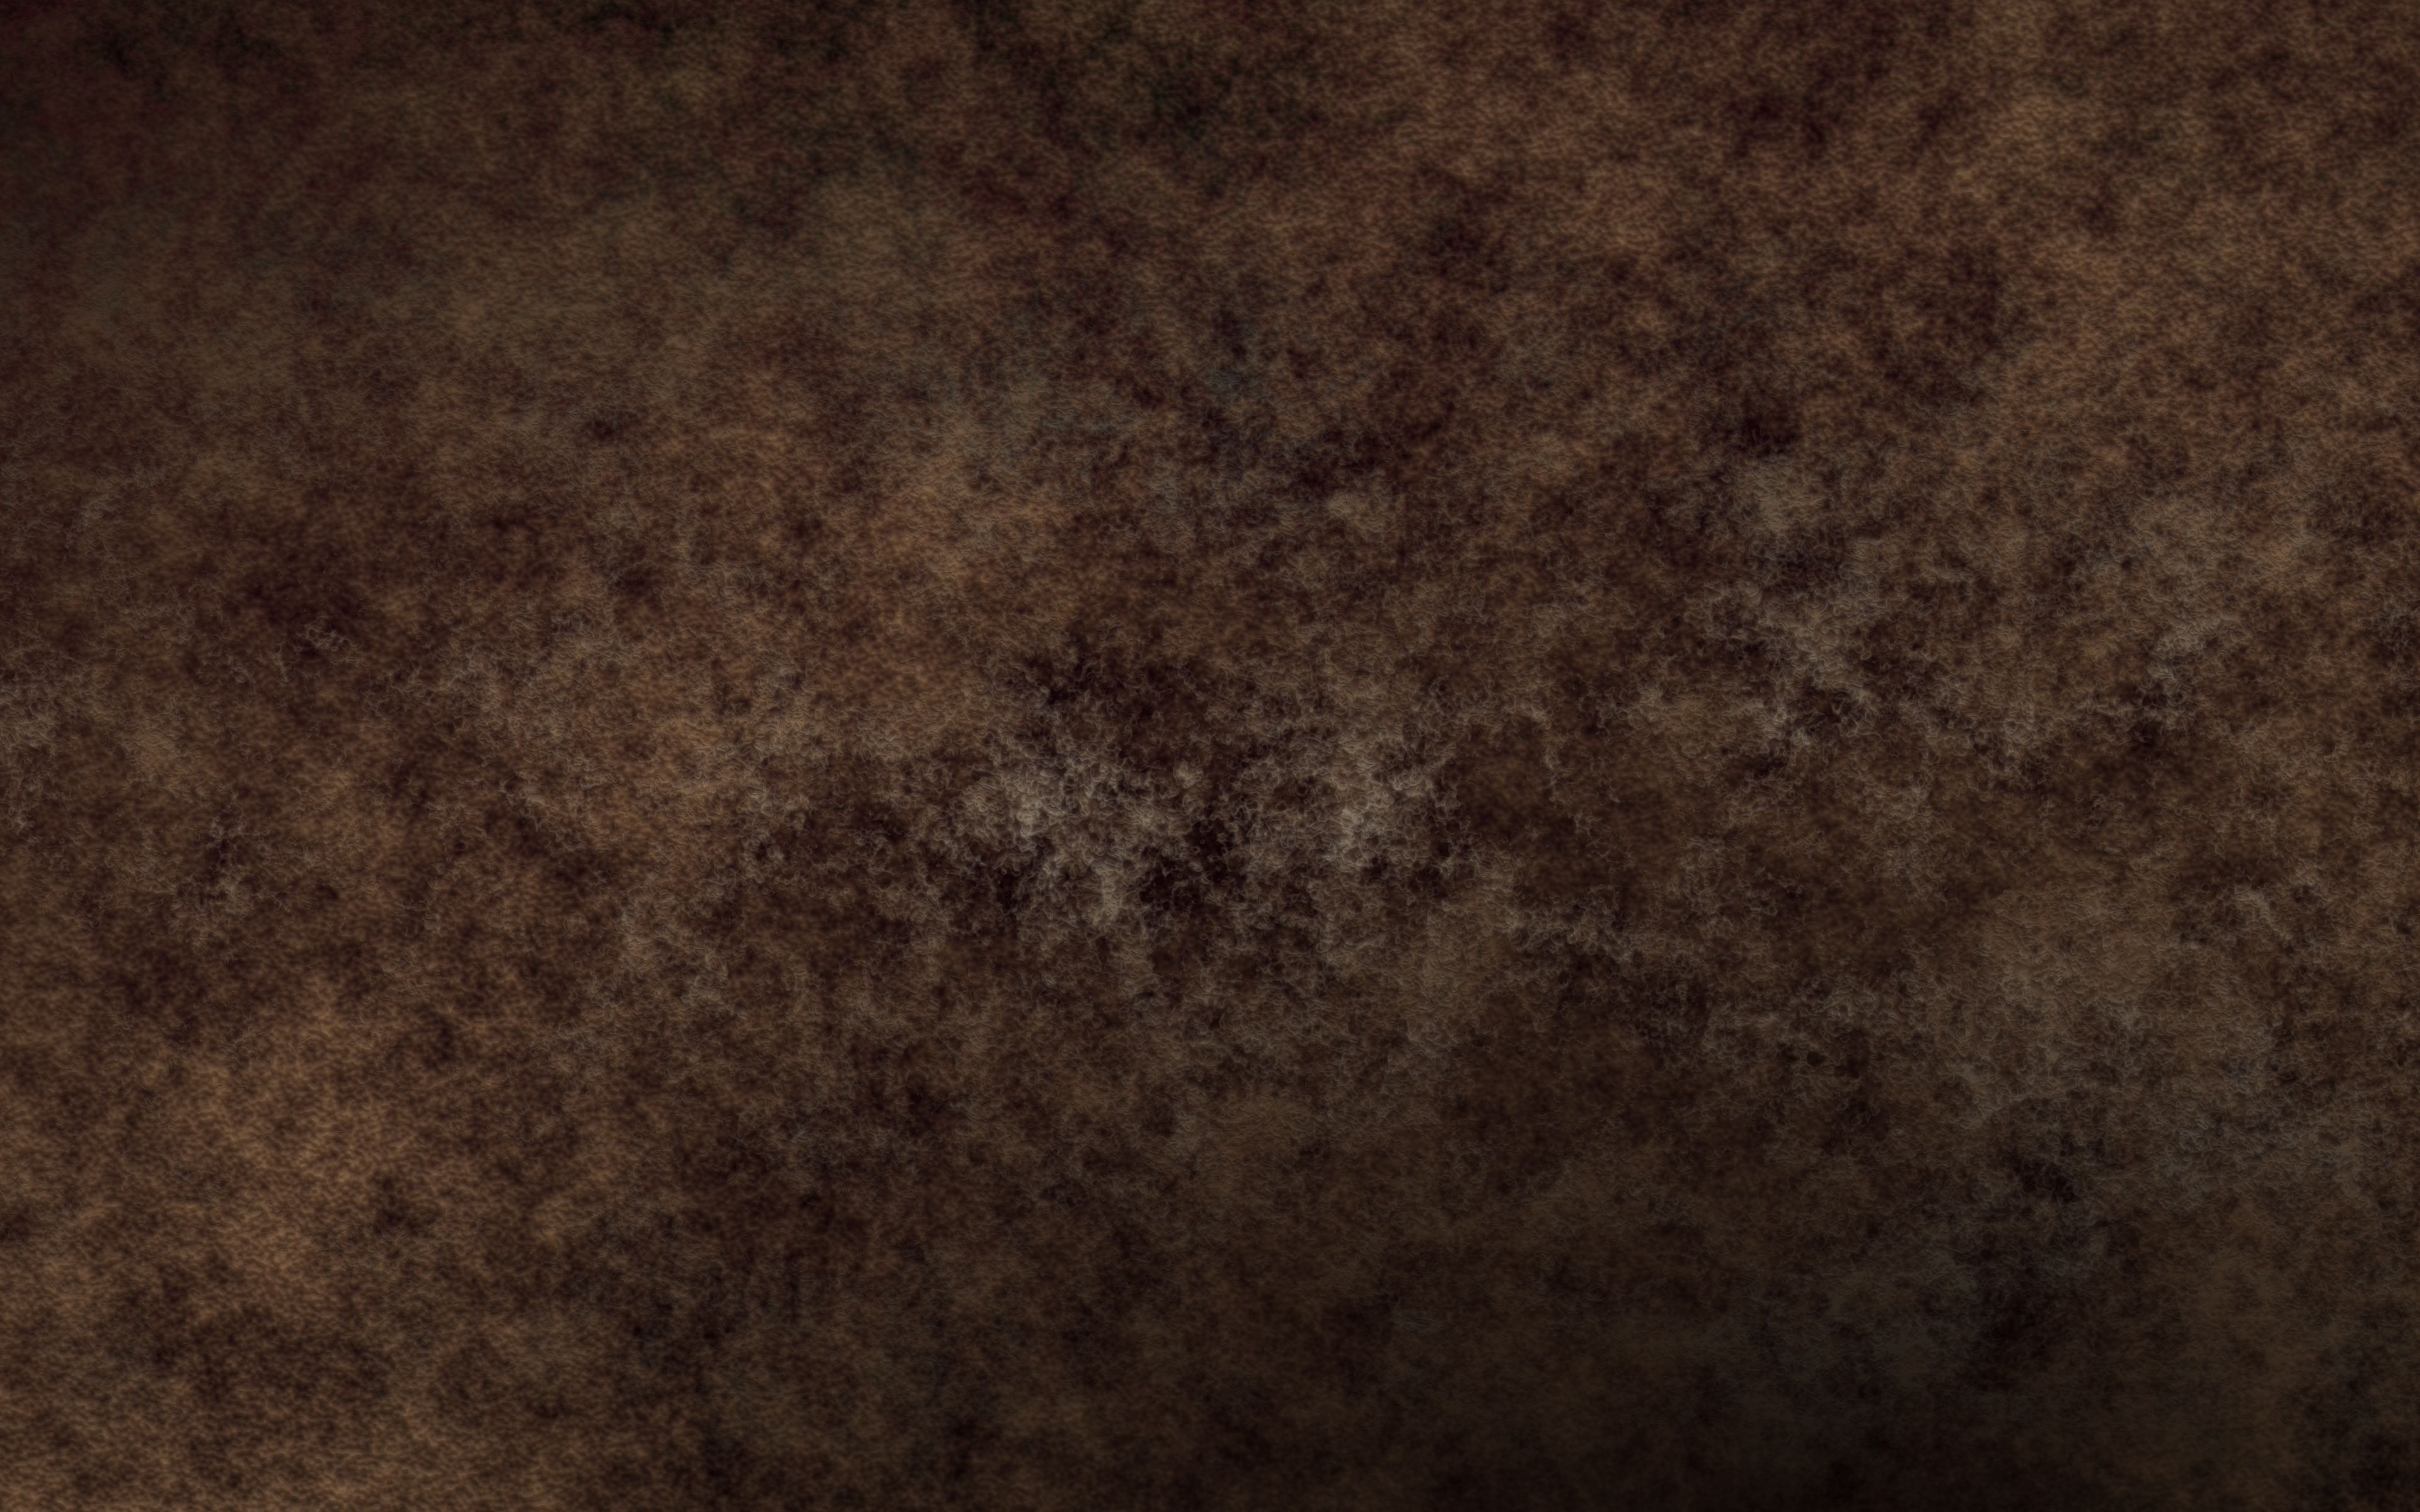 HD wallpaper leather texture backgrounds textured brown dark  material  Wallpaper Flare